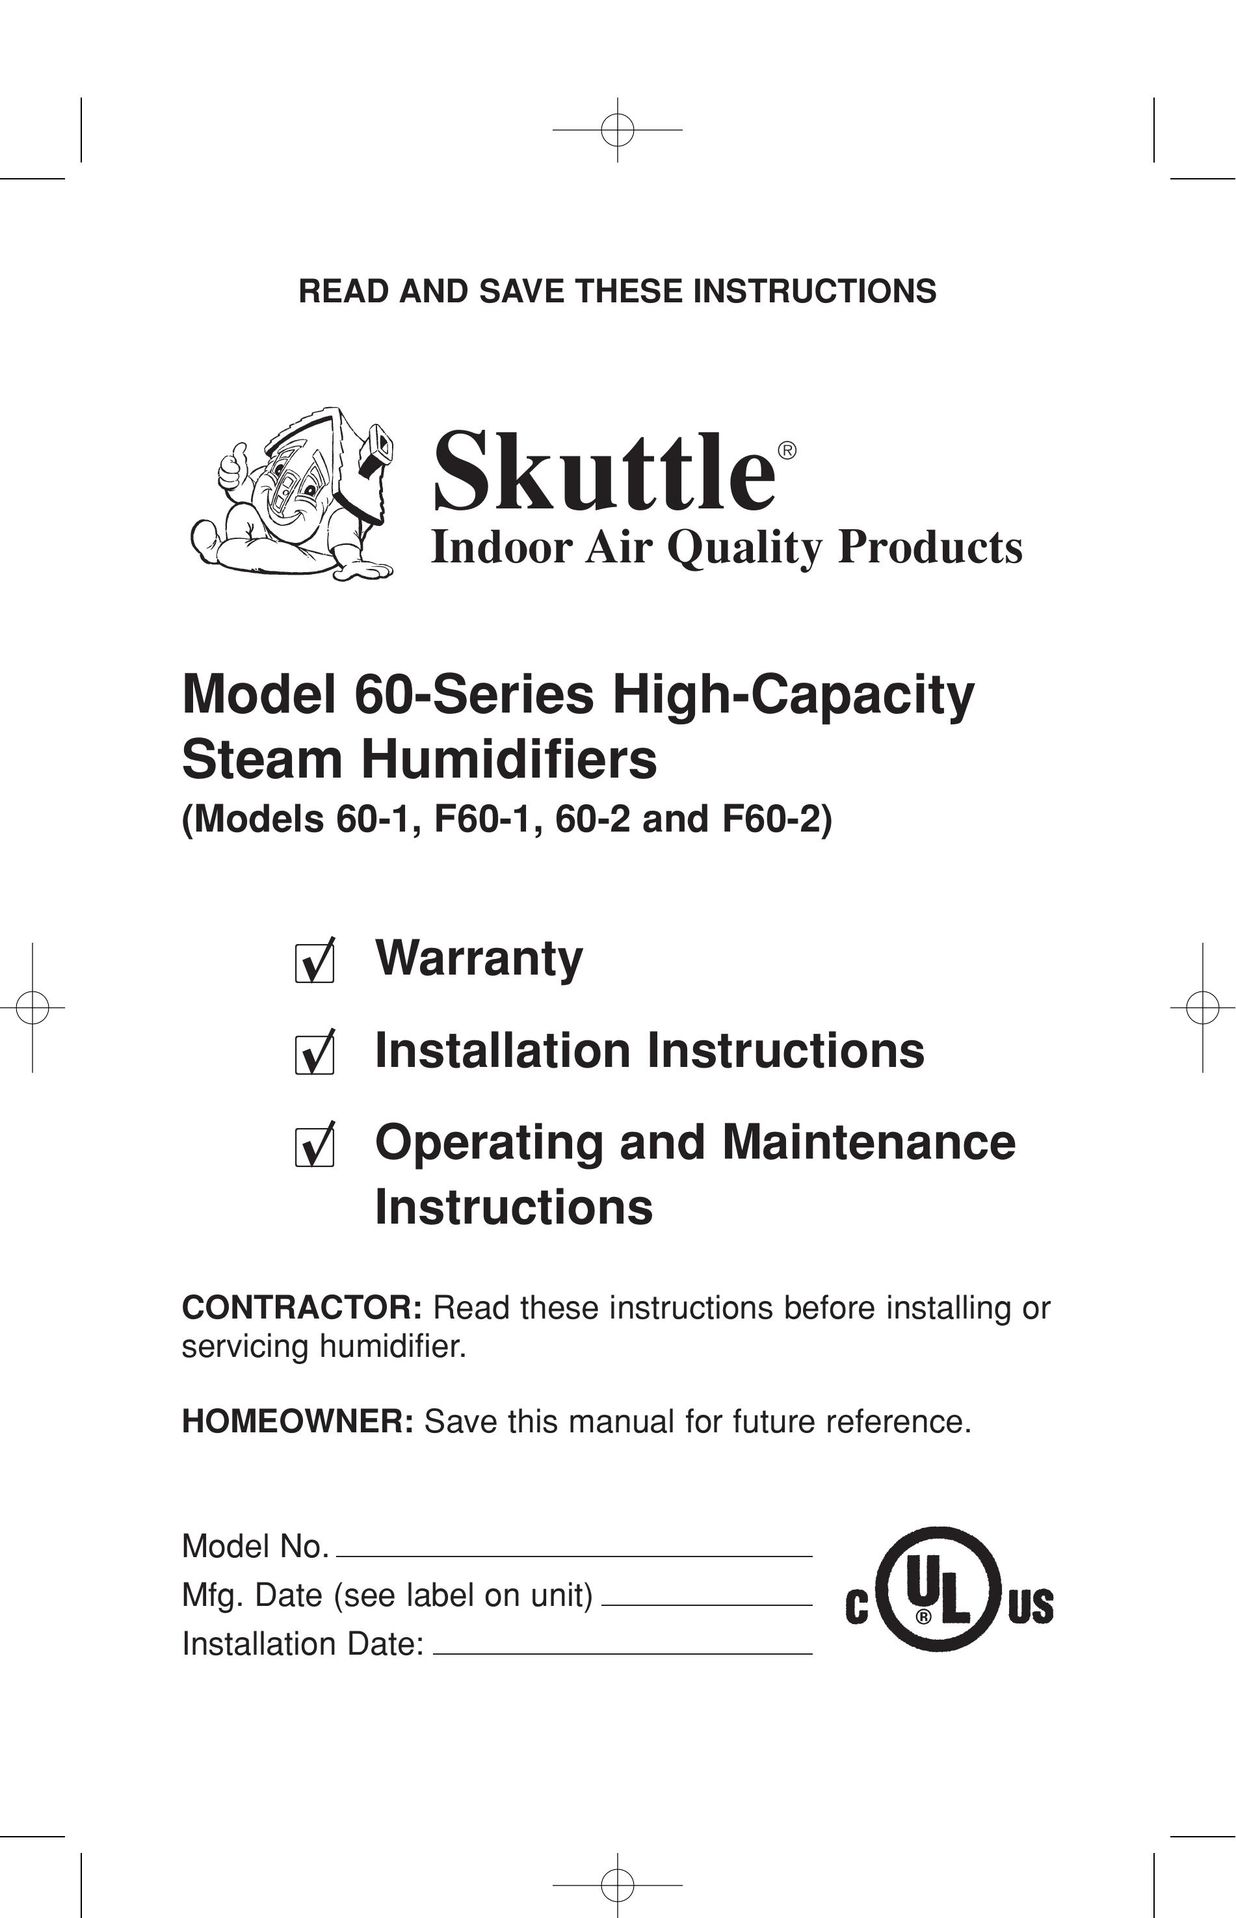 Skuttle Indoor Air Quality Products 60-2, F60-2 Humidifier User Manual